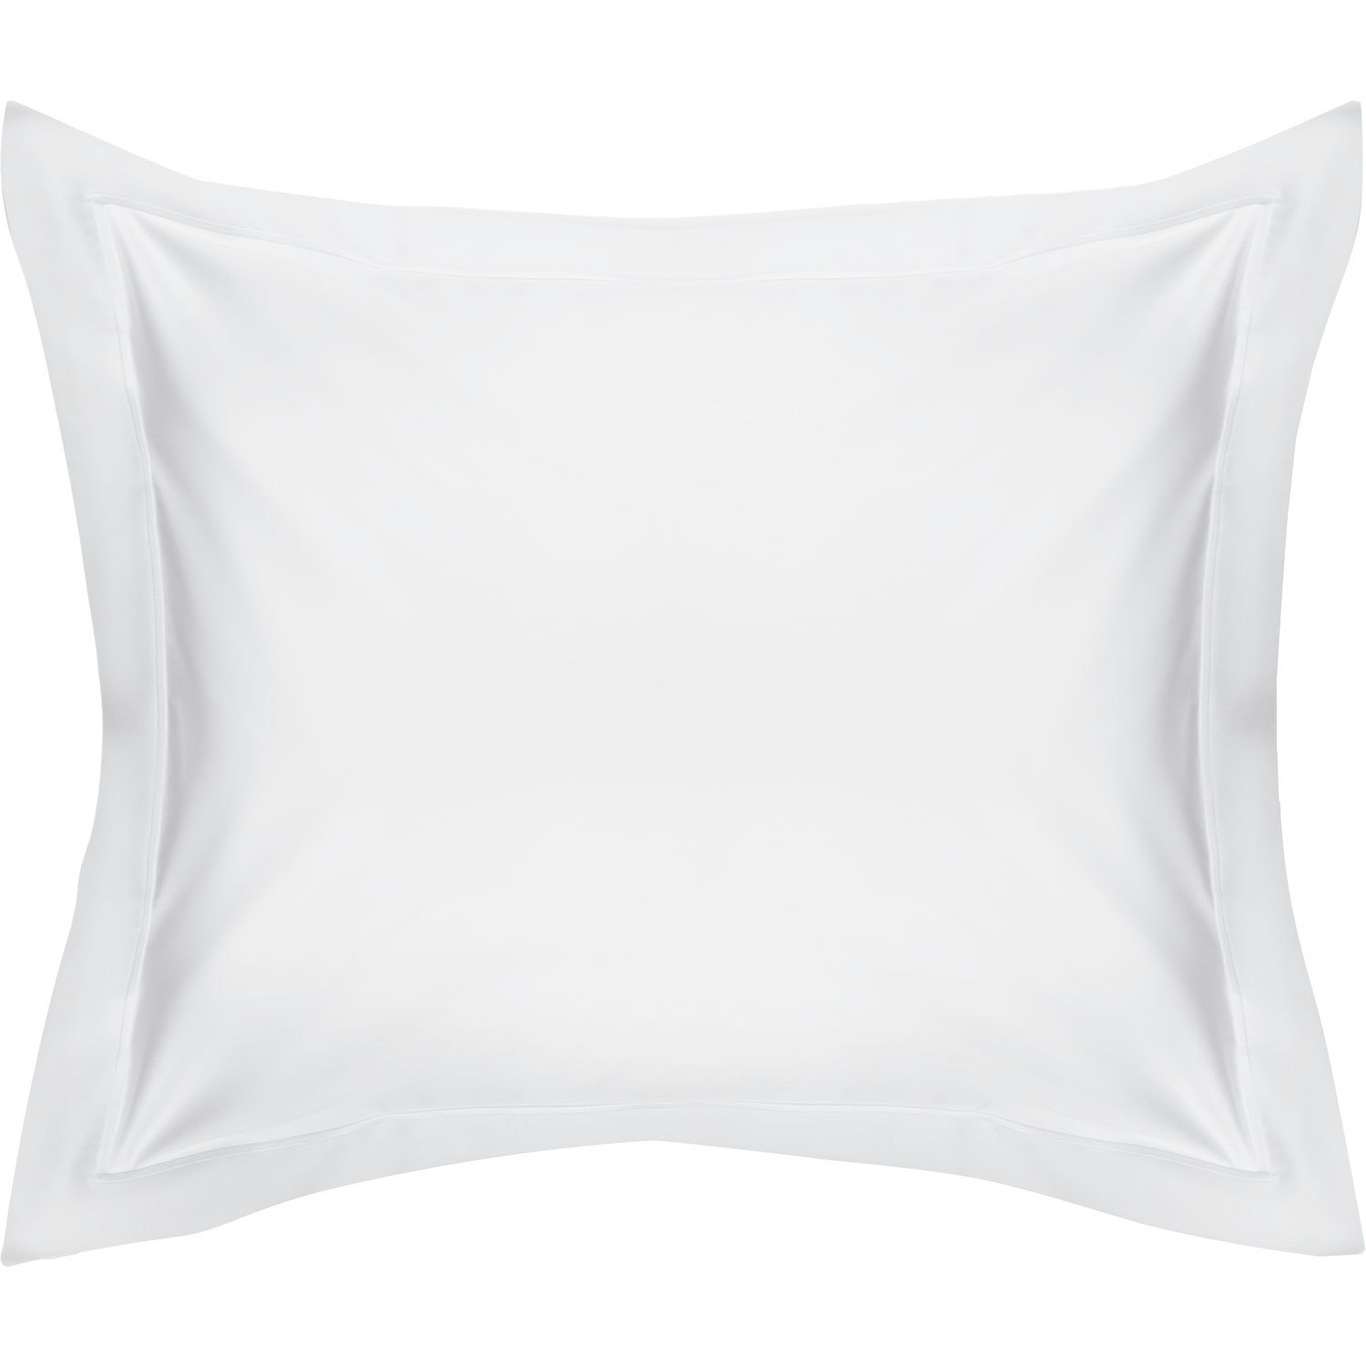 Spirit Pillowcase With Embroidery 2-pack 50x60 cm, Pure White